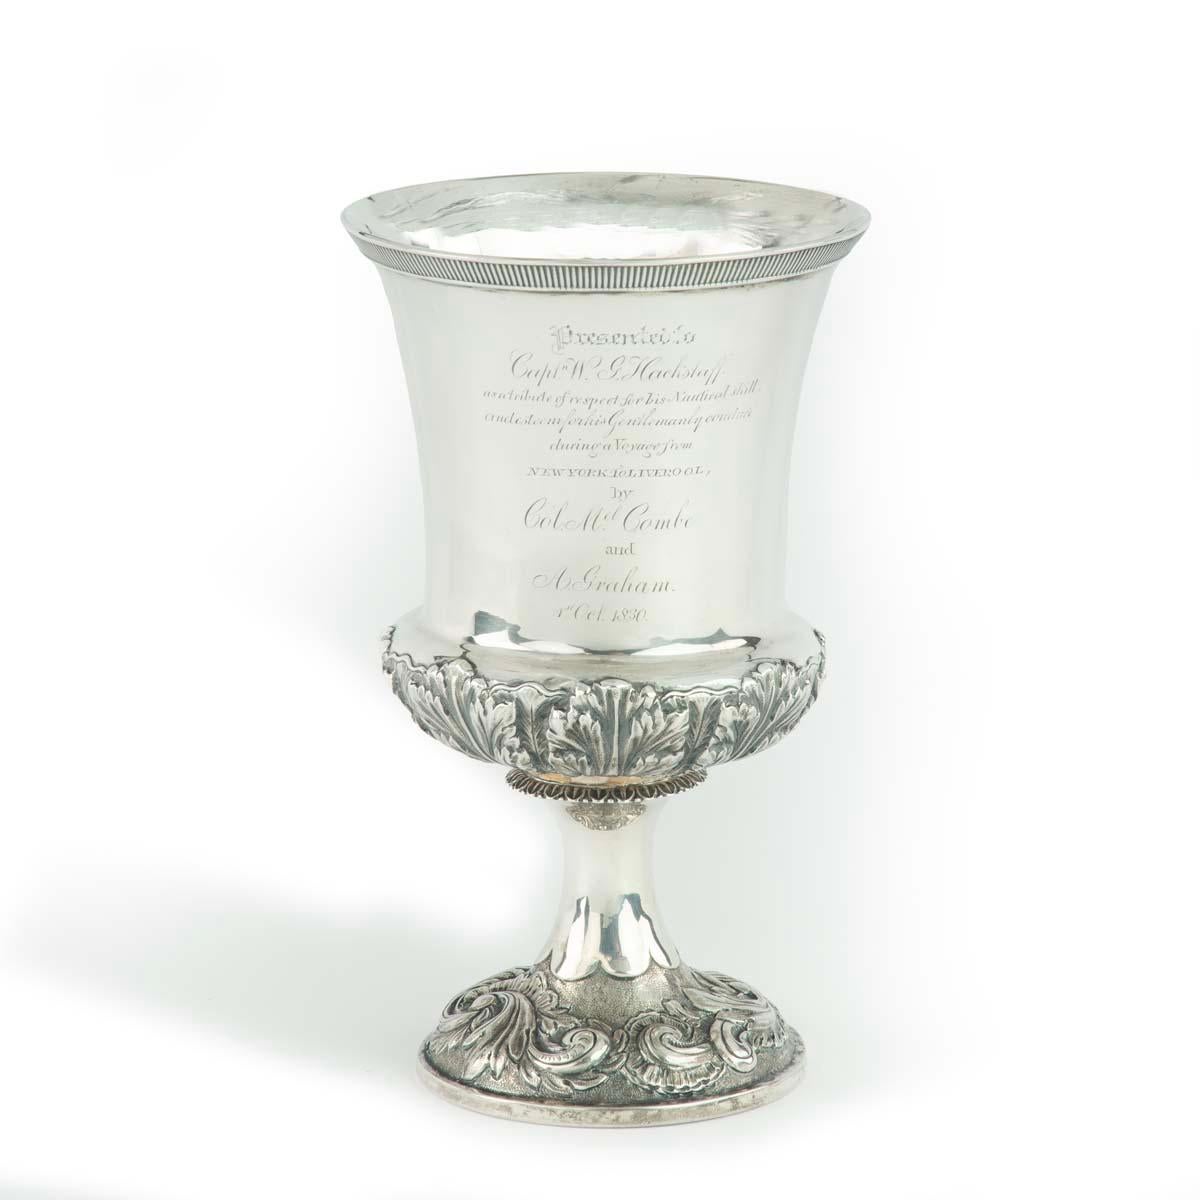 This flared silver cup has a border of repoussé scrolls and foliage on the lower bulb of the goblet and around the foot.  The full inscription is written below.  Partially assayed for maker John Edward Terrey and retailers Wordley & Co, Liverpool,